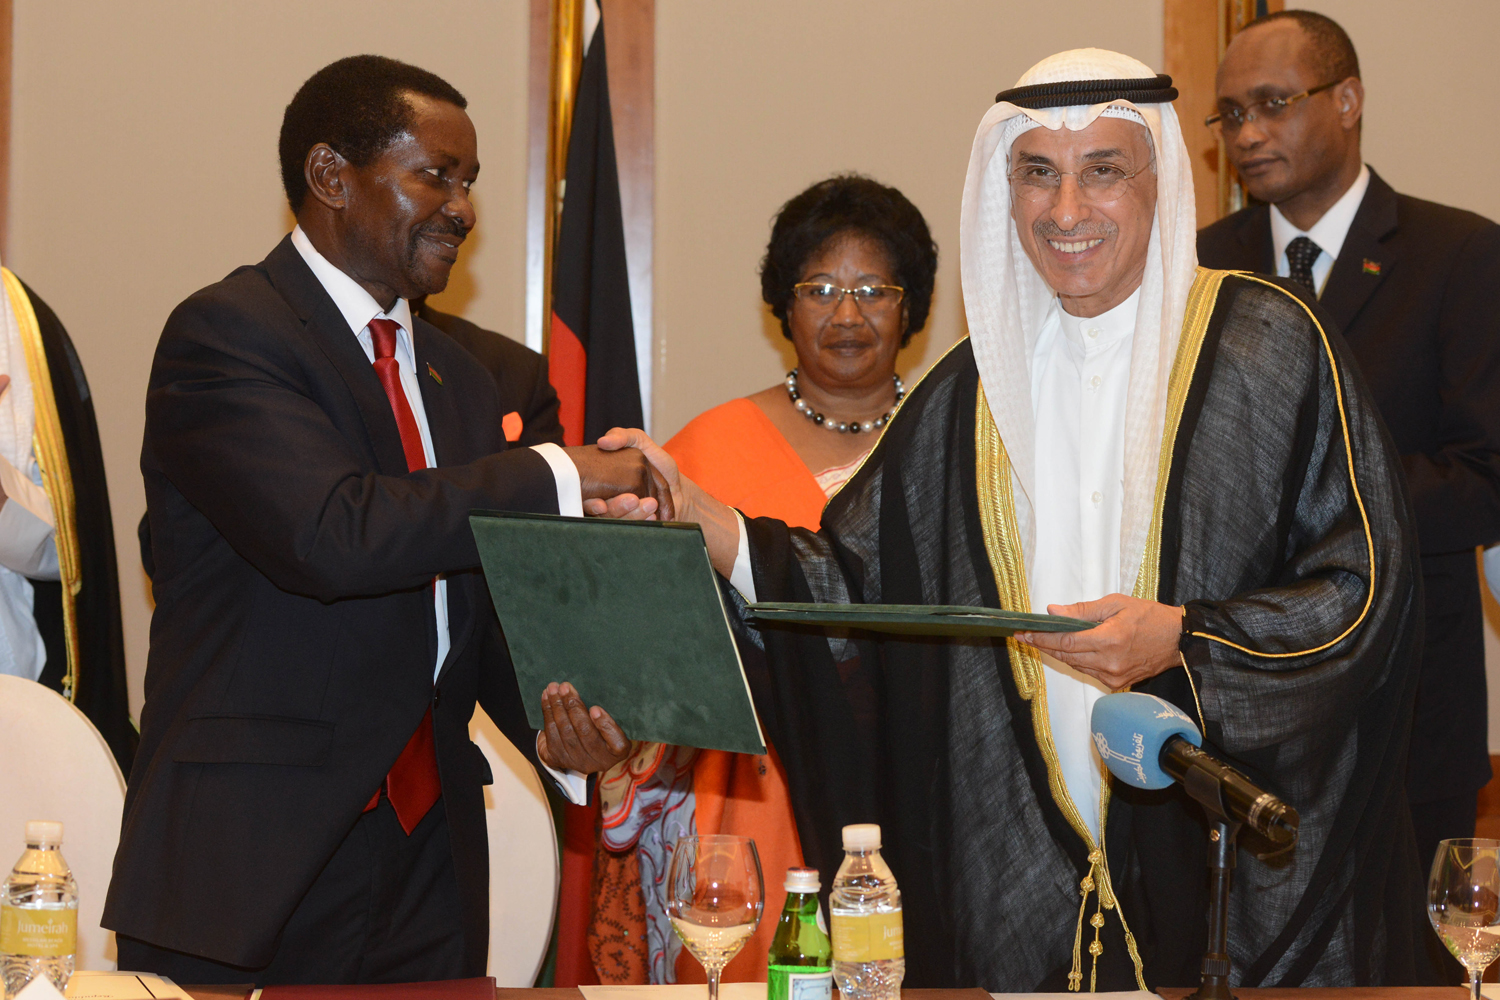 Kuwait''s Direct Aid signs MoU with Malawi to build university in the African country